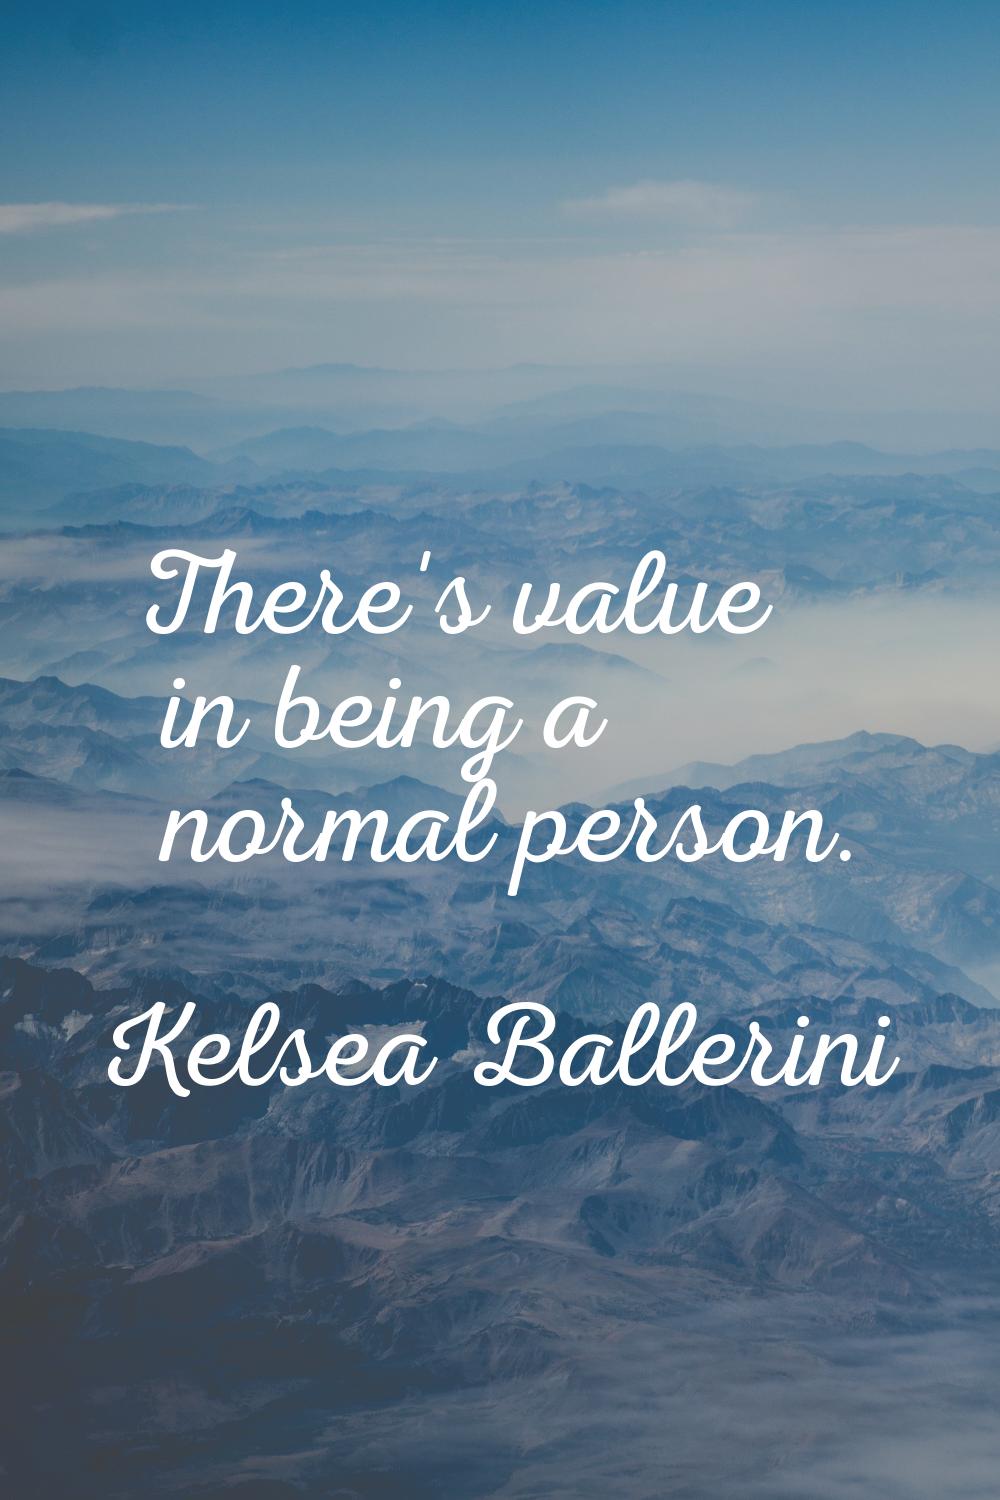 There's value in being a normal person.